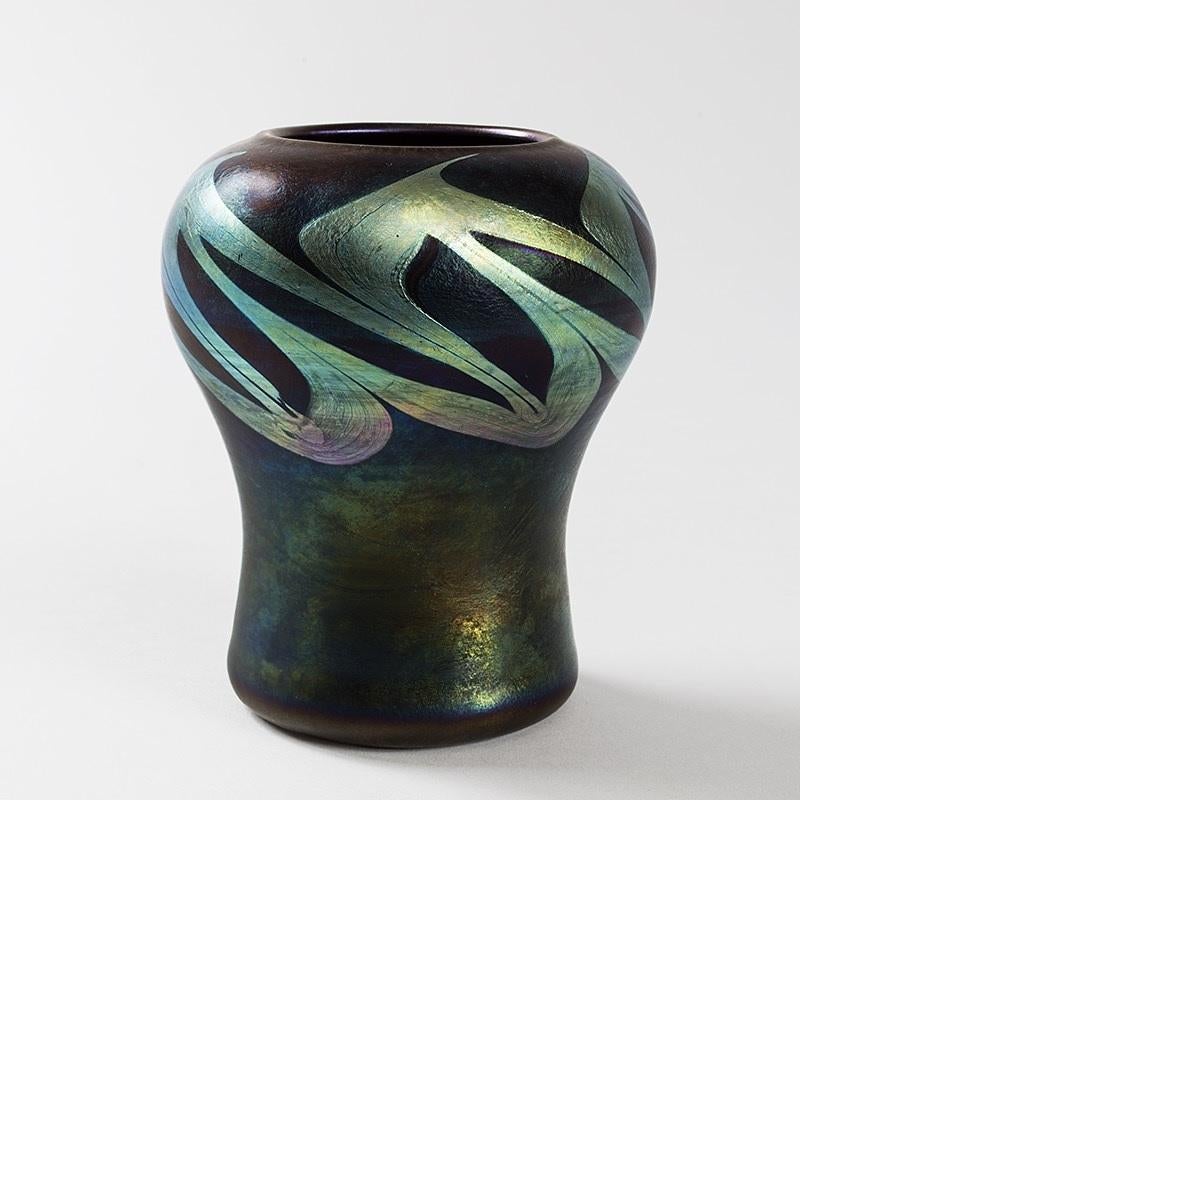 A blue green Favrile glass vase by Louis Comfort Tiffany featuring a pulled silver iridescent border.  Circa 1900's.

Favrile is the trade name Tiffany gave to his blown art glass. The name derives from the Latin word fabrilis, meaning “made by